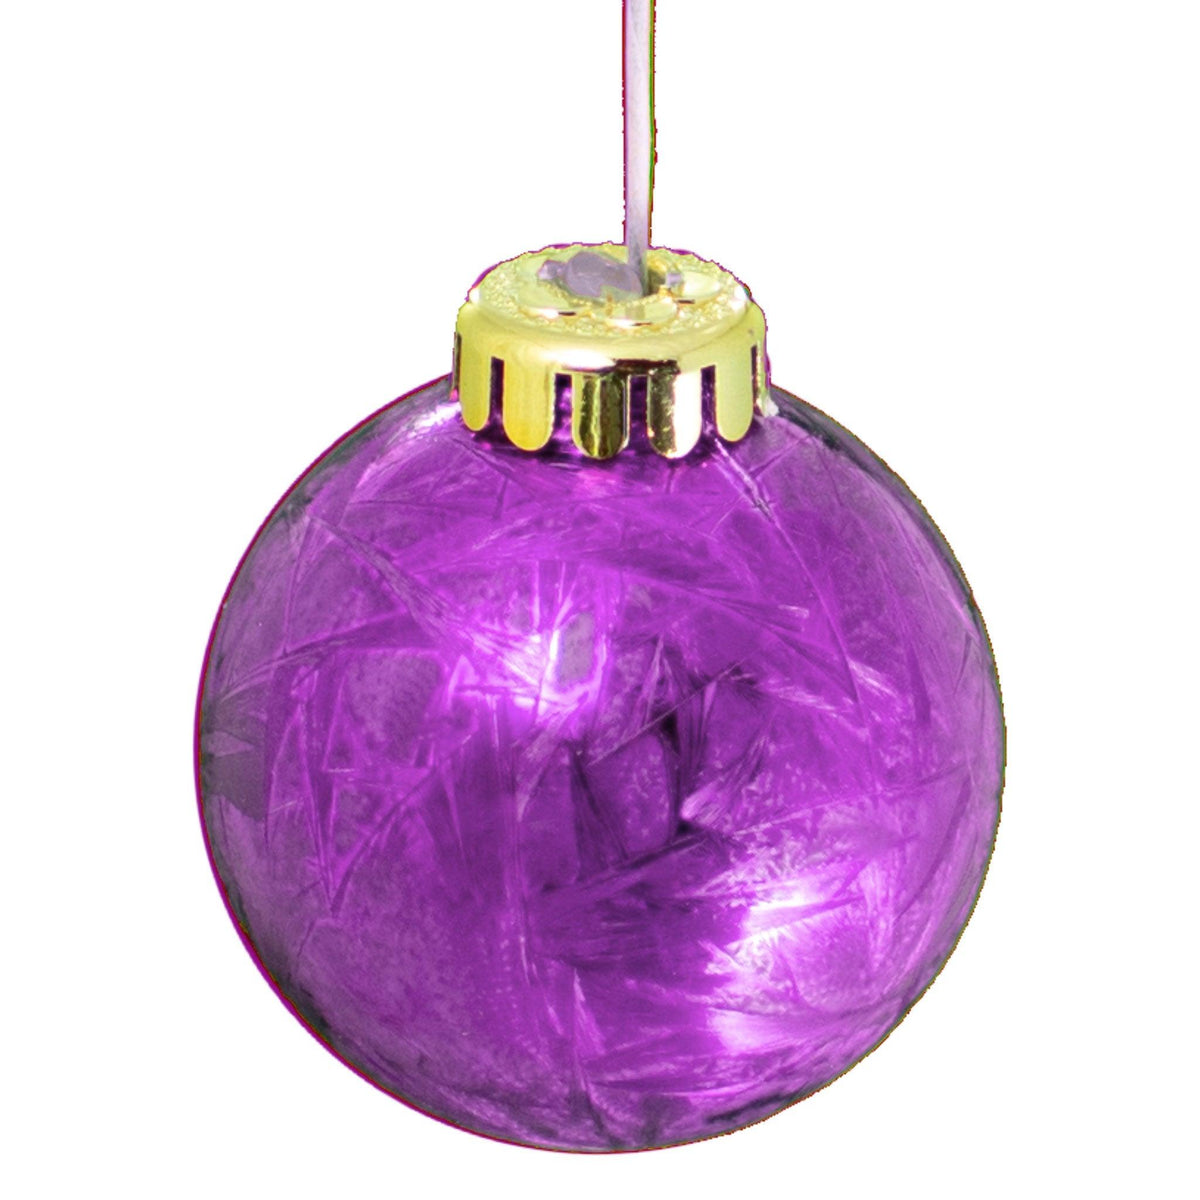 Lee Display offers brand new Shiny Fuscia Sequin Purple Plastic Ball Ornaments at wholesale prices for affordable Christmas Tree Hanging and Holiday Decorating on sale at leedisplay.com